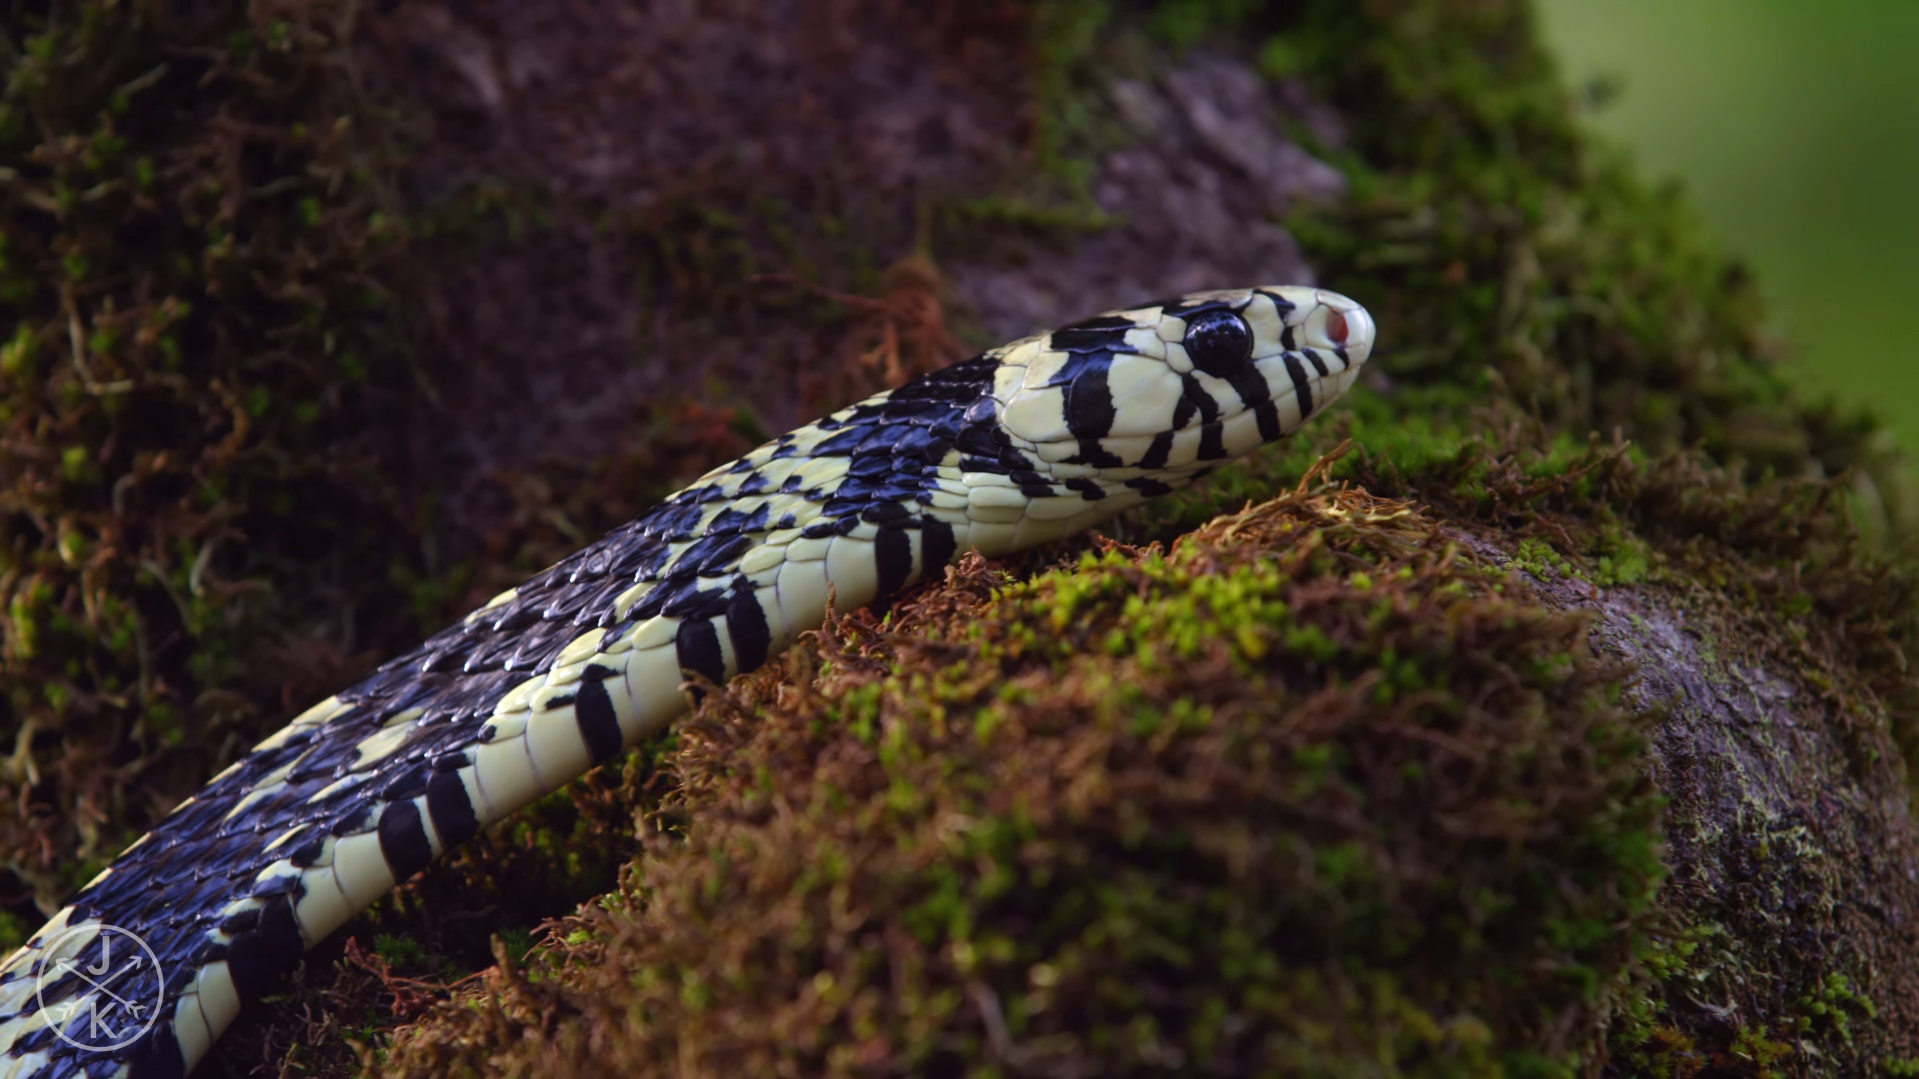 General 1919x1079 reptiles animals snake